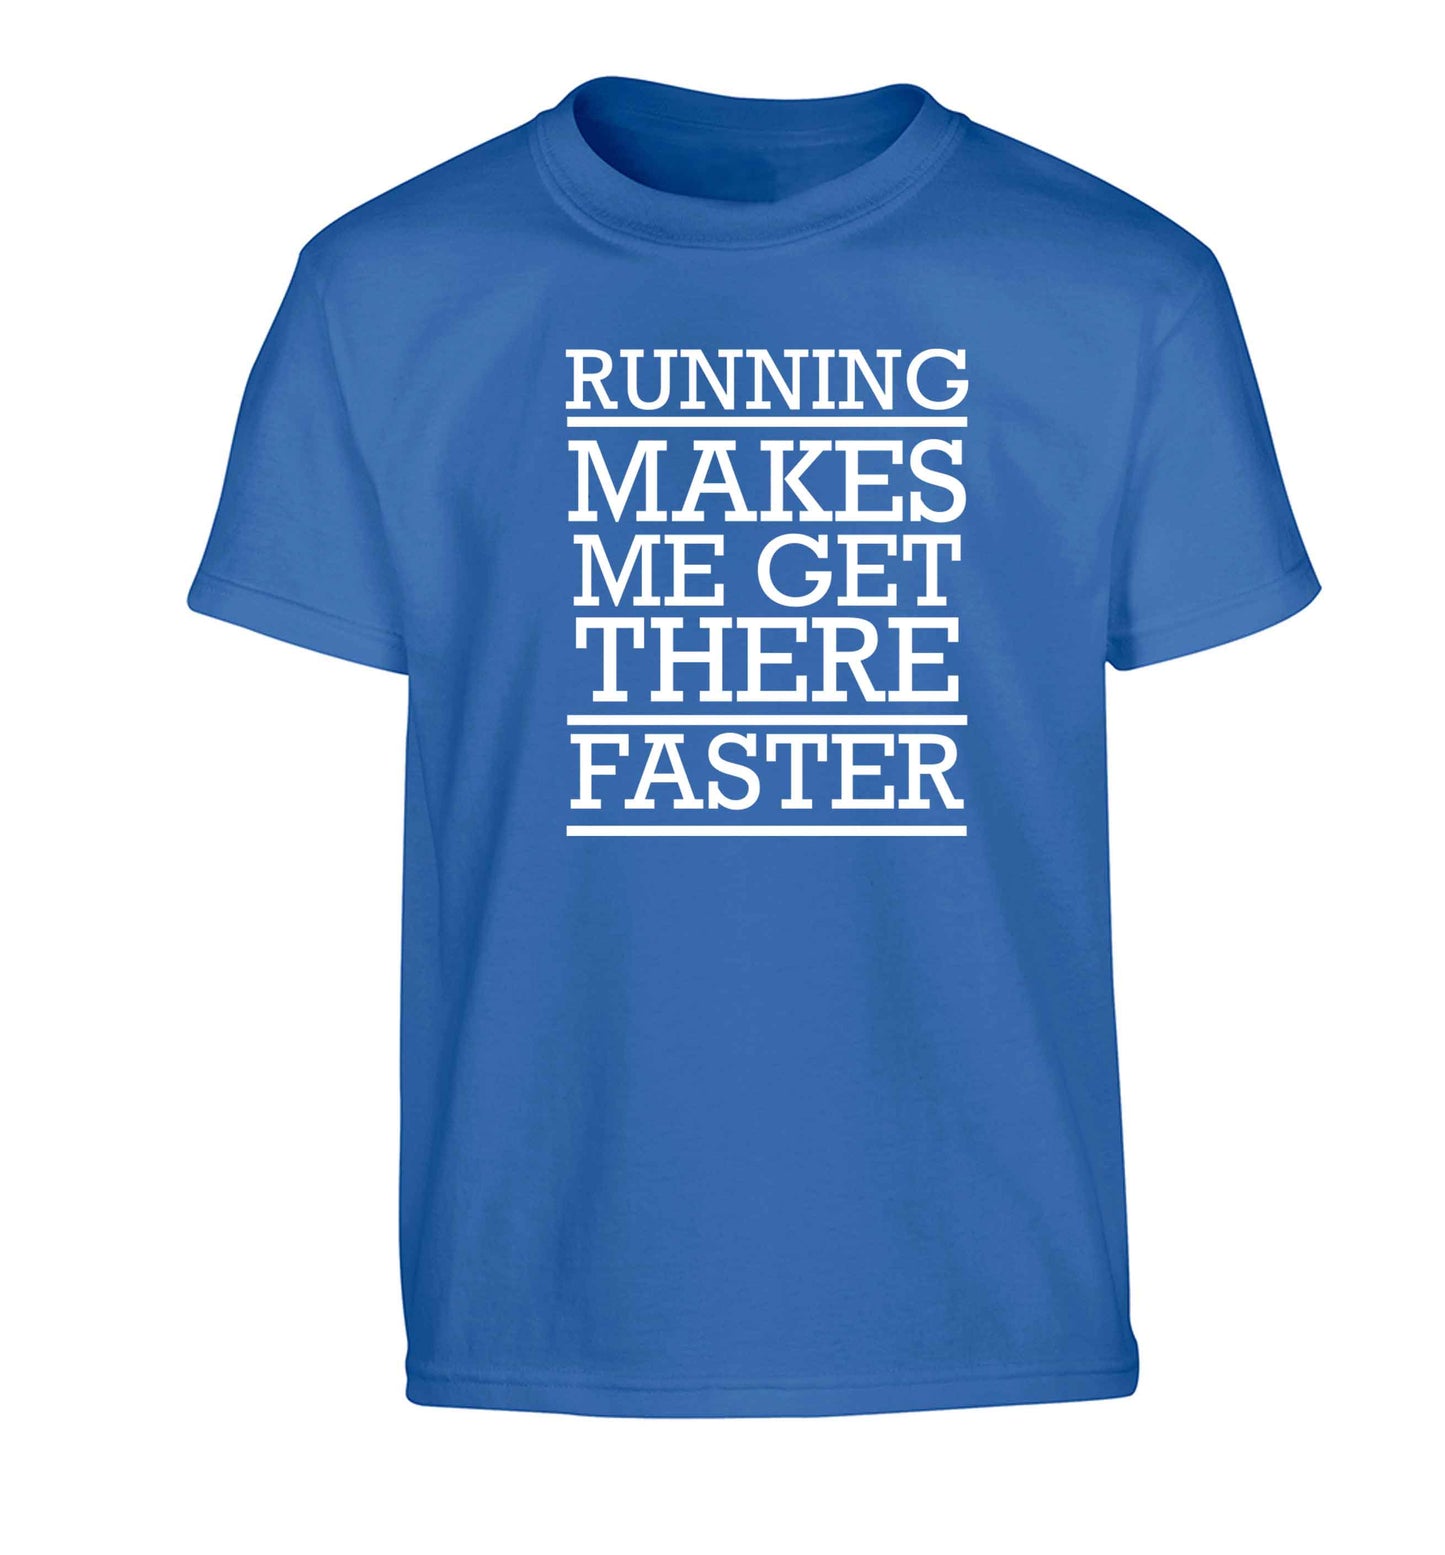 Running makes me get there faster Children's blue Tshirt 12-13 Years